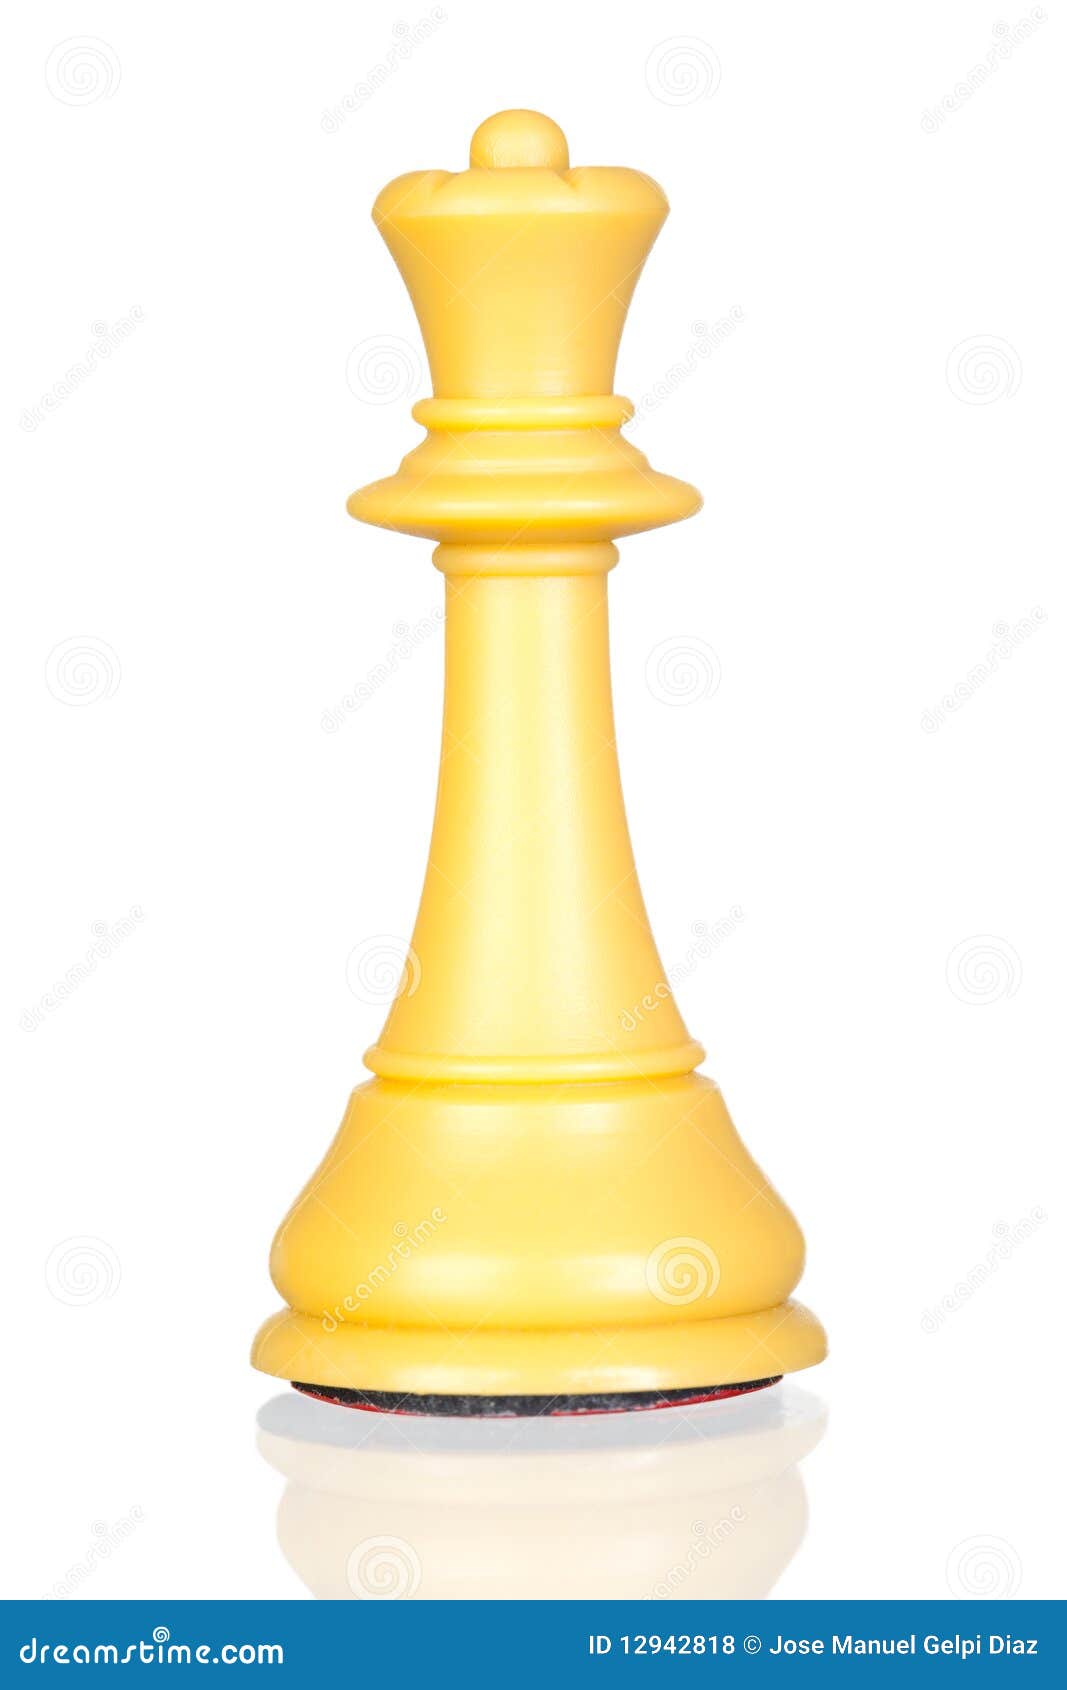 117+ Thousand Chess Queen Royalty-Free Images, Stock Photos